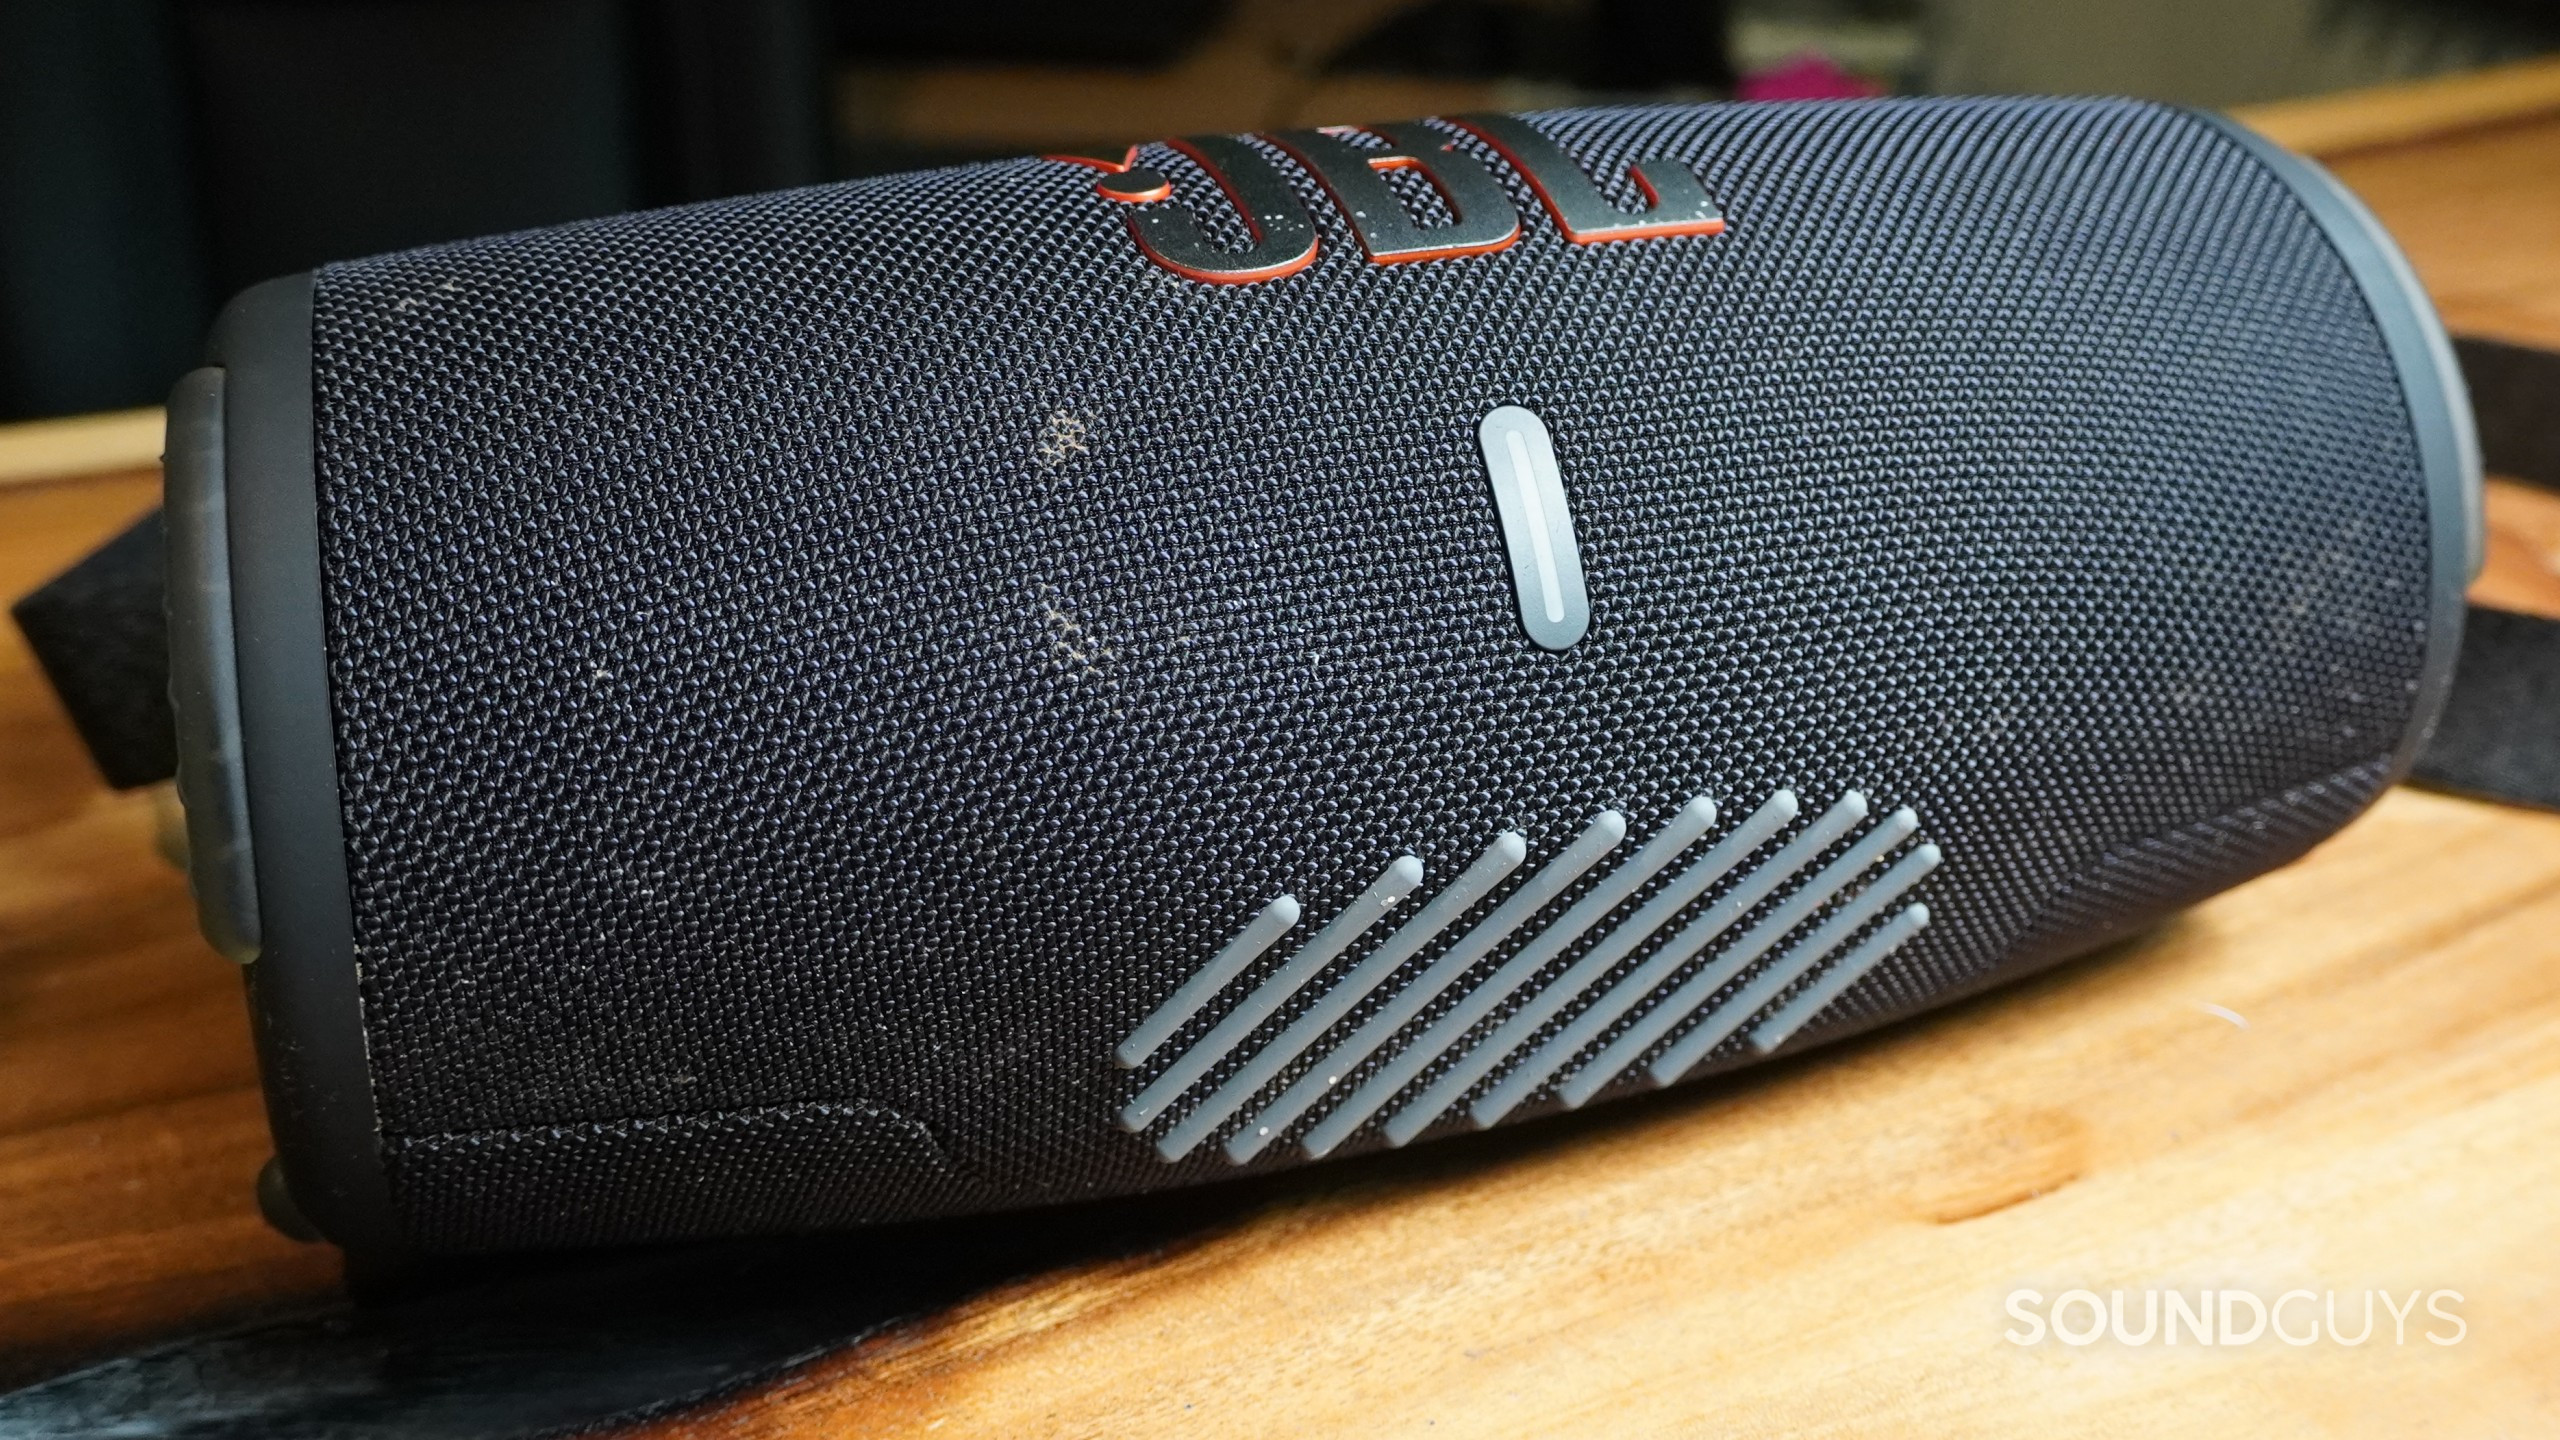 The JBL Xtreme 3 Bluetooth speaker showing a flat, textured area on its bottom with no feet installed.